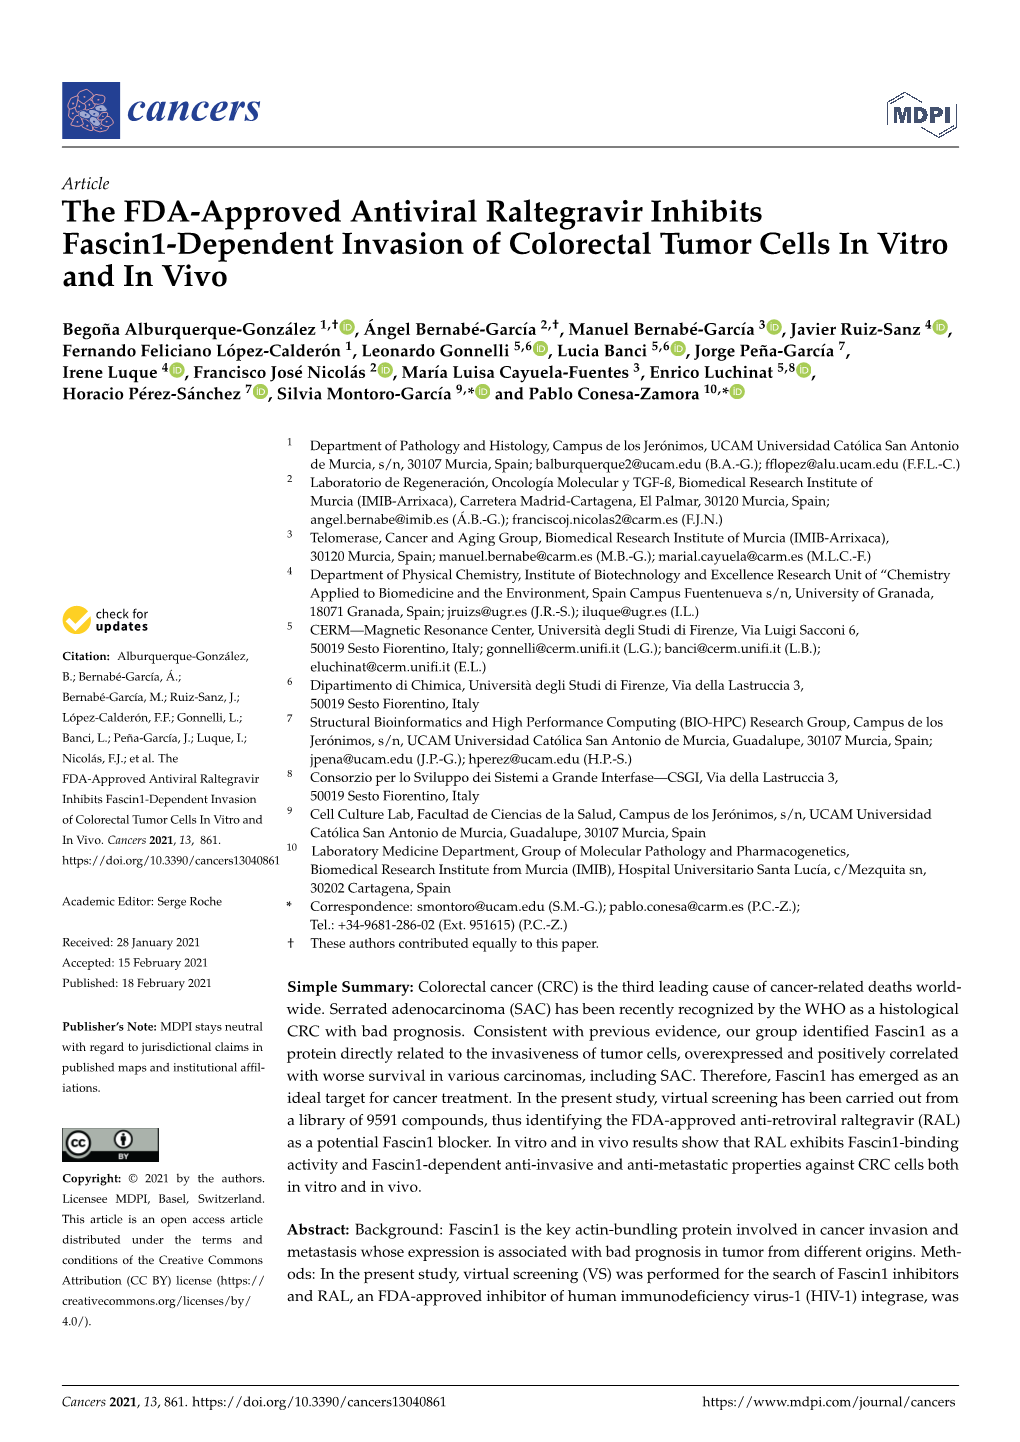 The FDA-Approved Antiviral Raltegravir Inhibits Fascin1-Dependent Invasion of Colorectal Tumor Cells in Vitro and in Vivo